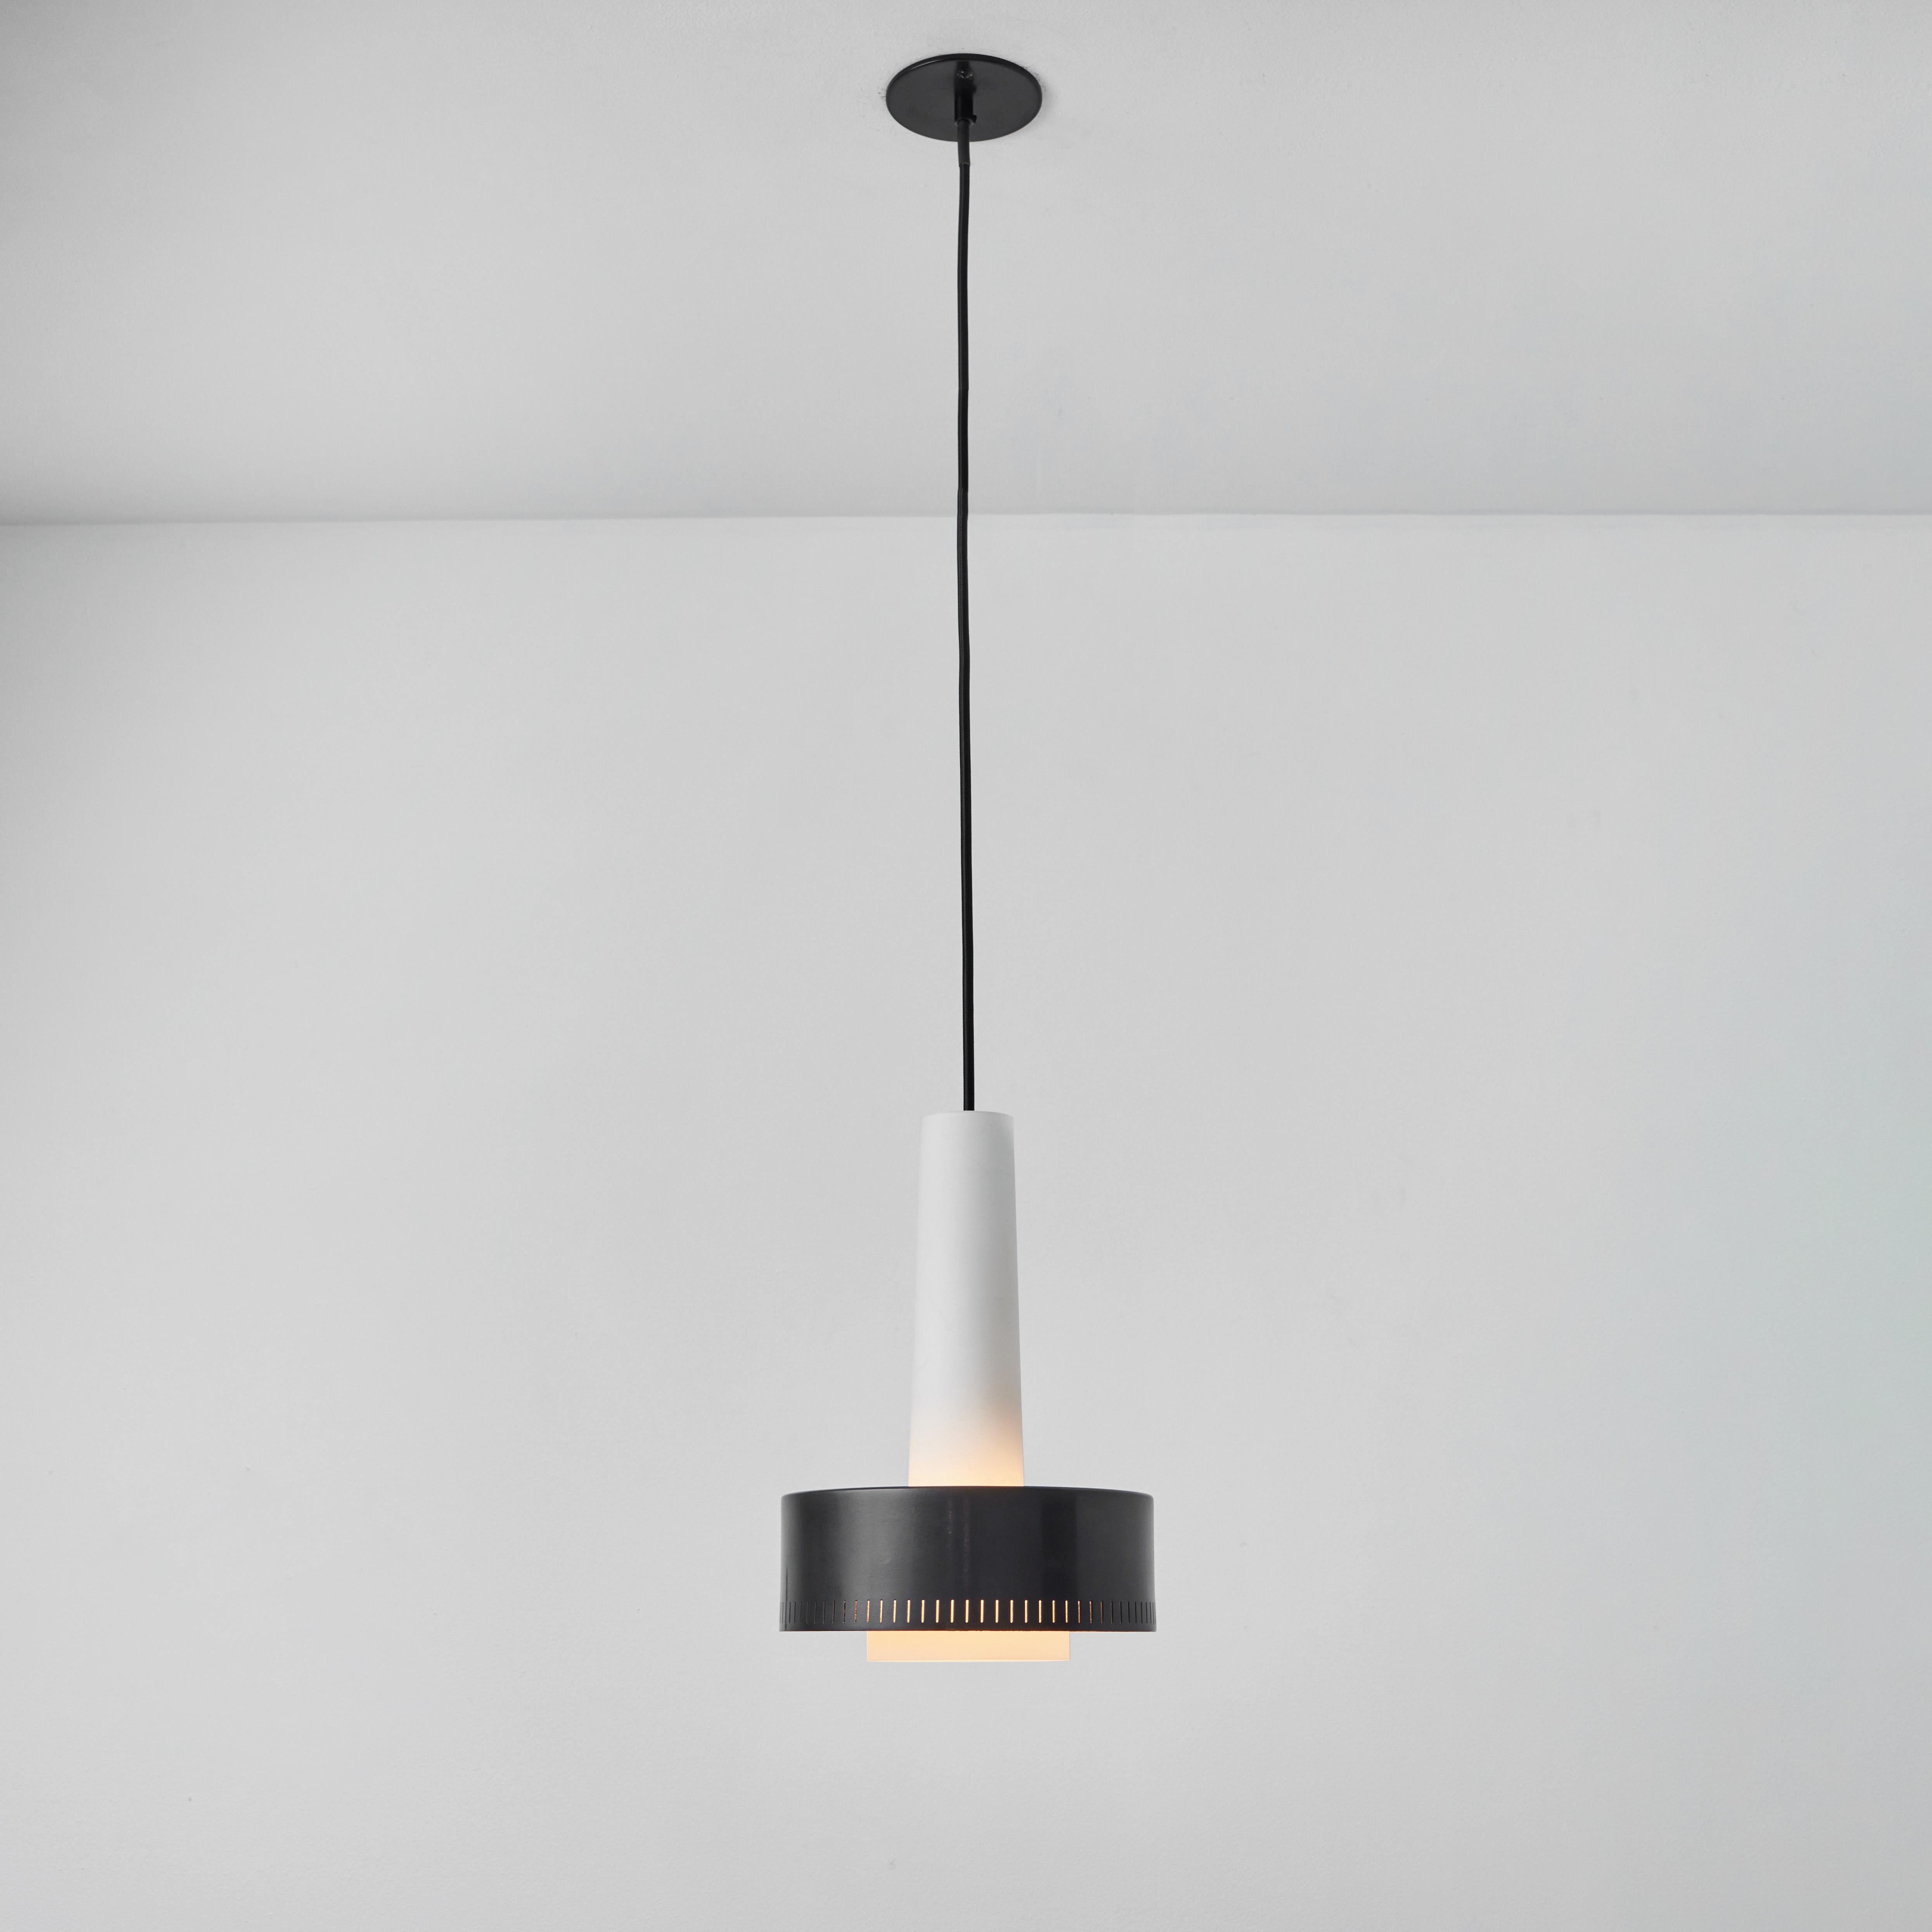 Painted 1950s Glass & Perforated Metal Pendant Attributed to Bruno Gatta for Stilnovo